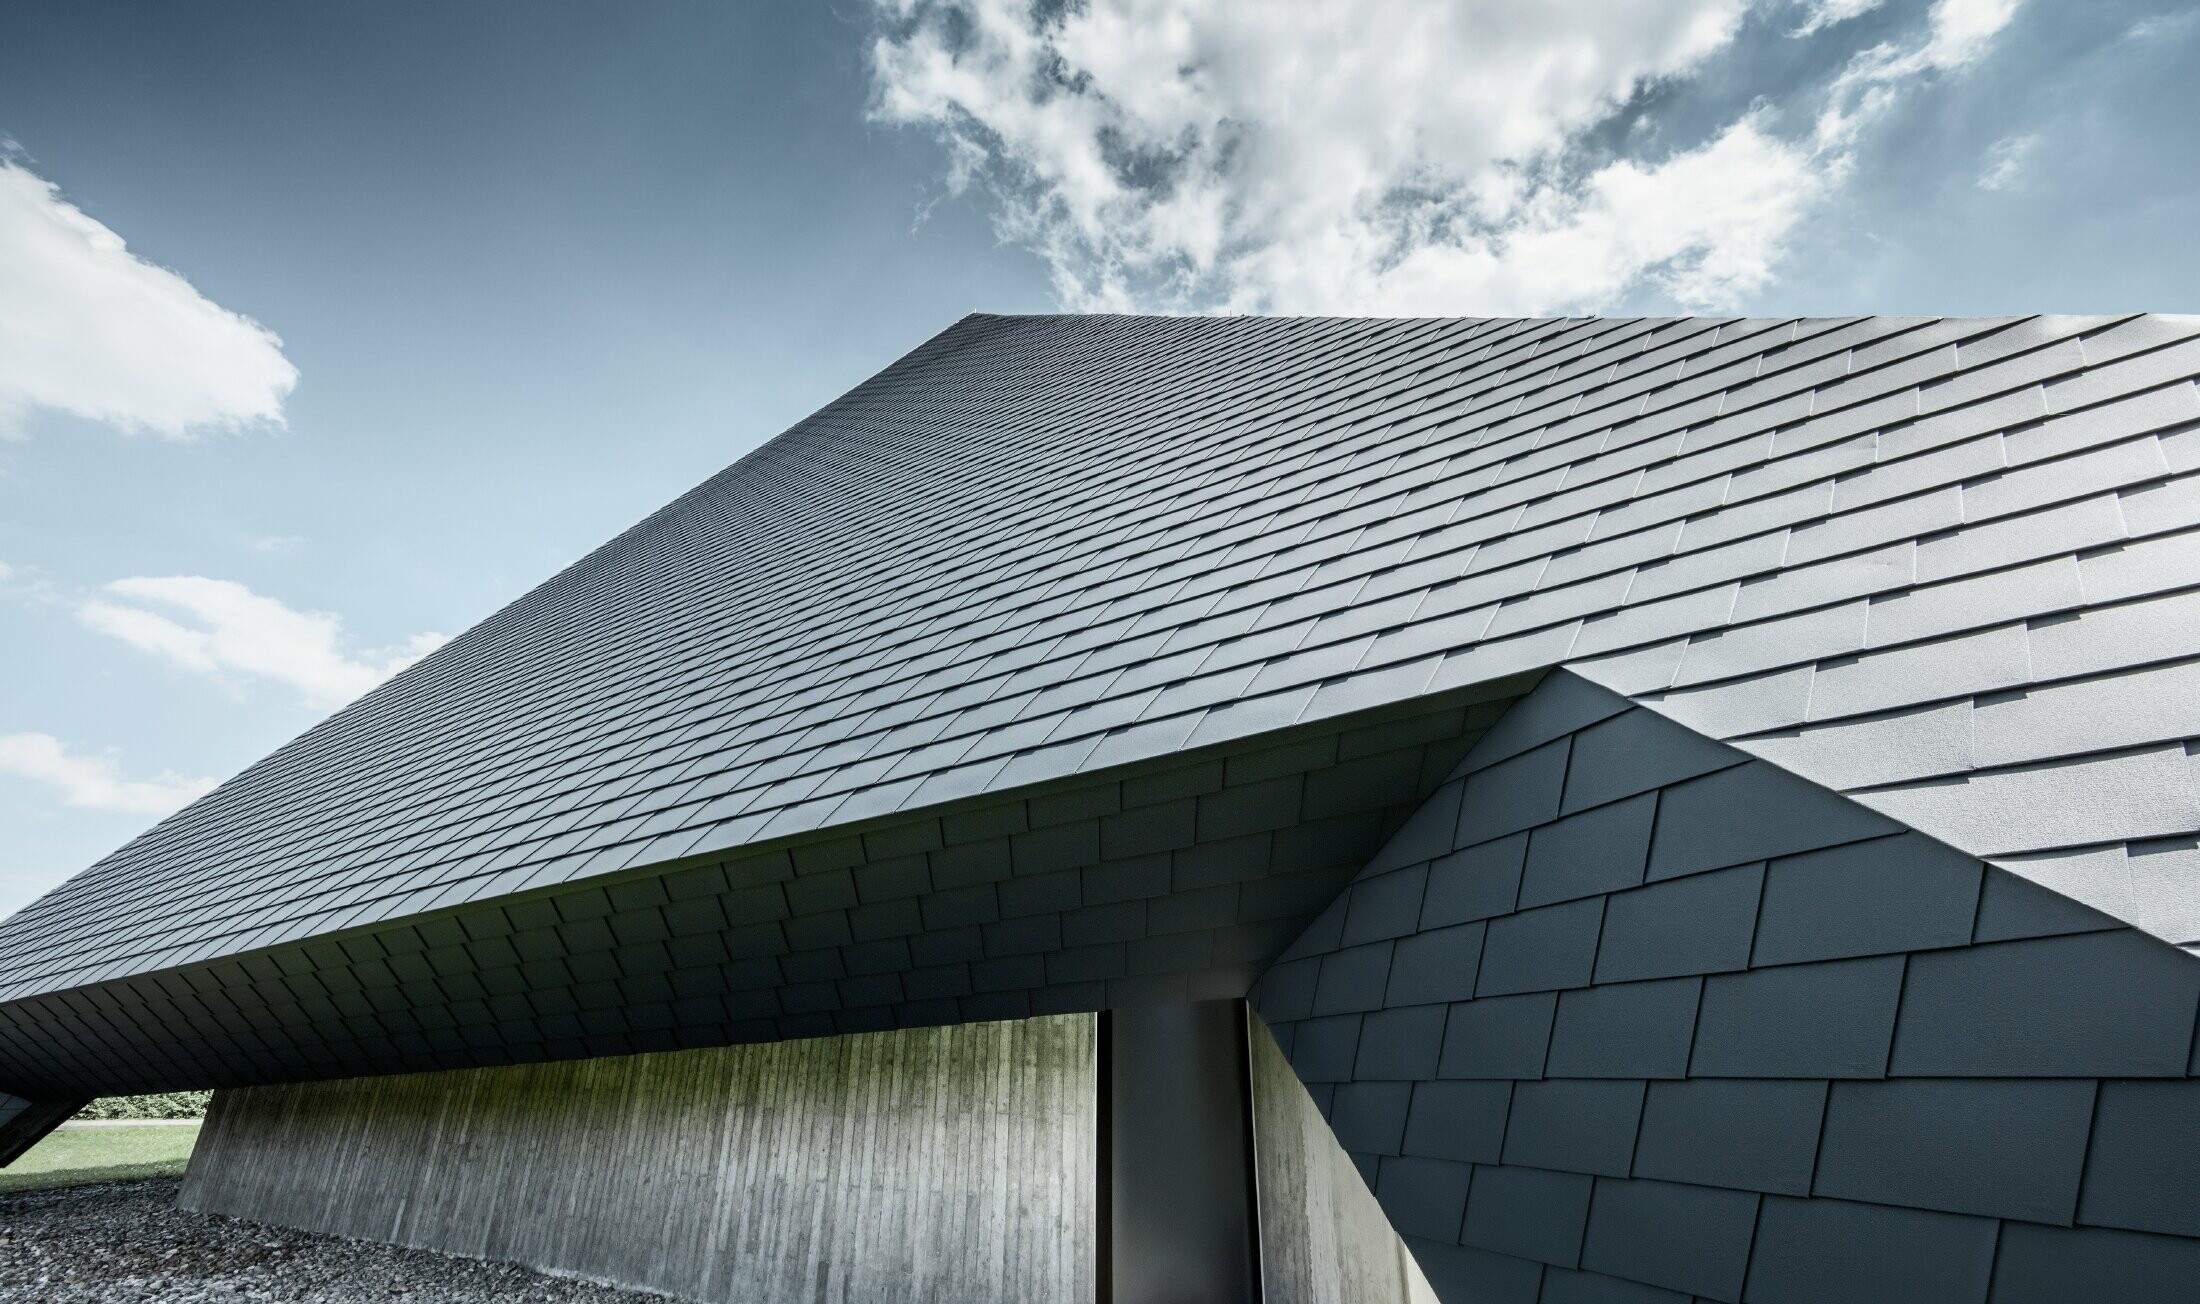 Catholic church in Langenau (Germany) with a pyramid-like design, covered with PREFA aluminium shingles in anthracite